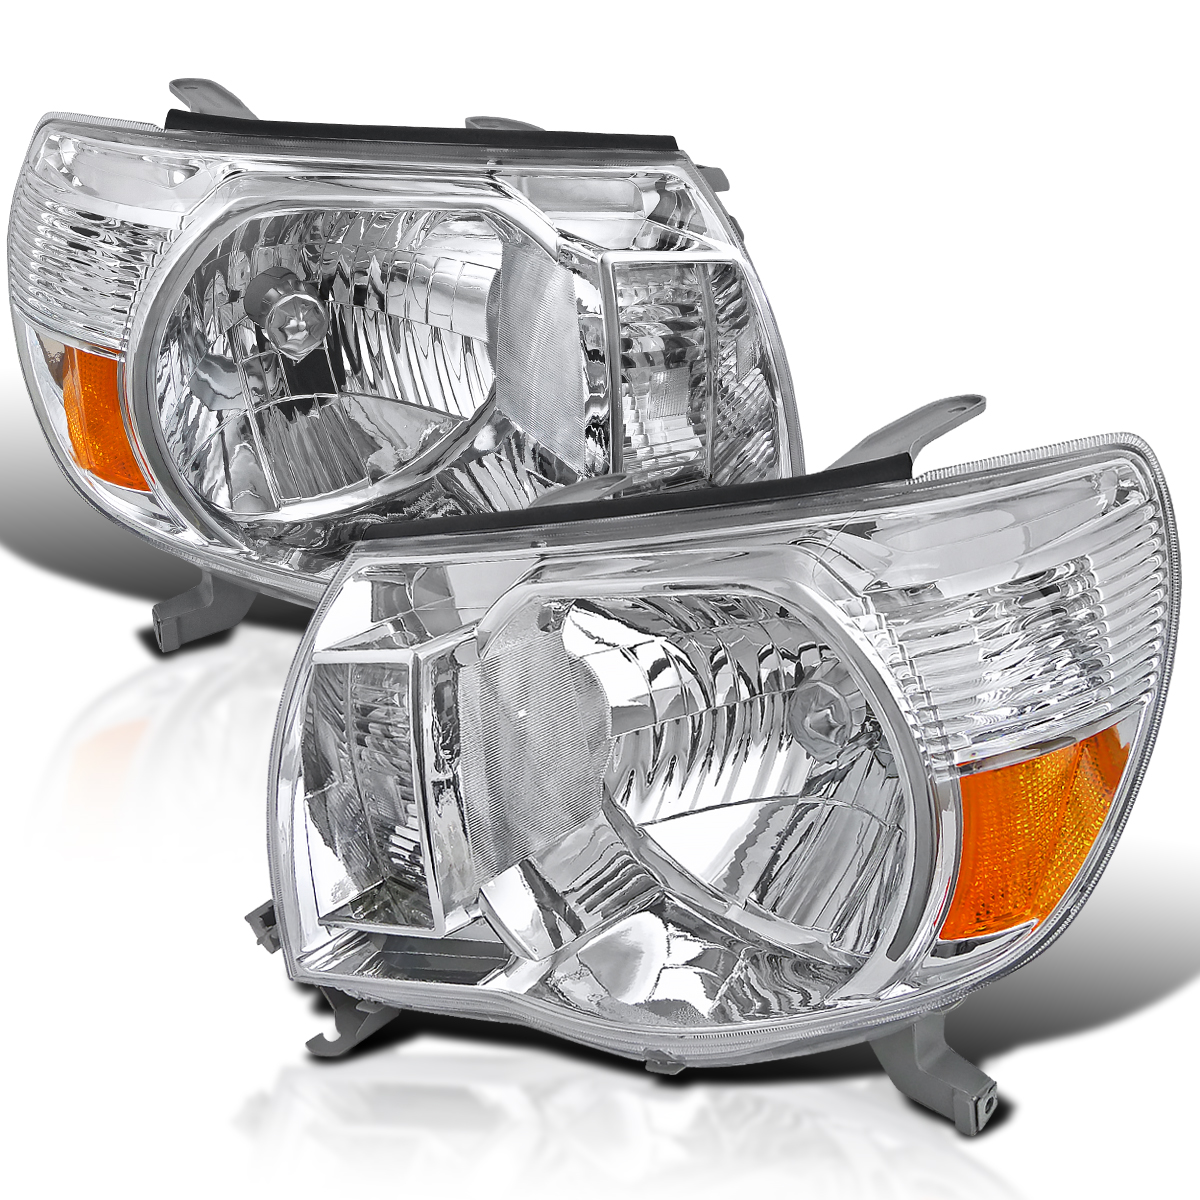 Spec-D Tuning Chrome Housing Clear Lens Headlights Compatible with 2005-2011 Toyota Tacoma L+R Pair Head Light Lamp Assembly - image 1 of 6